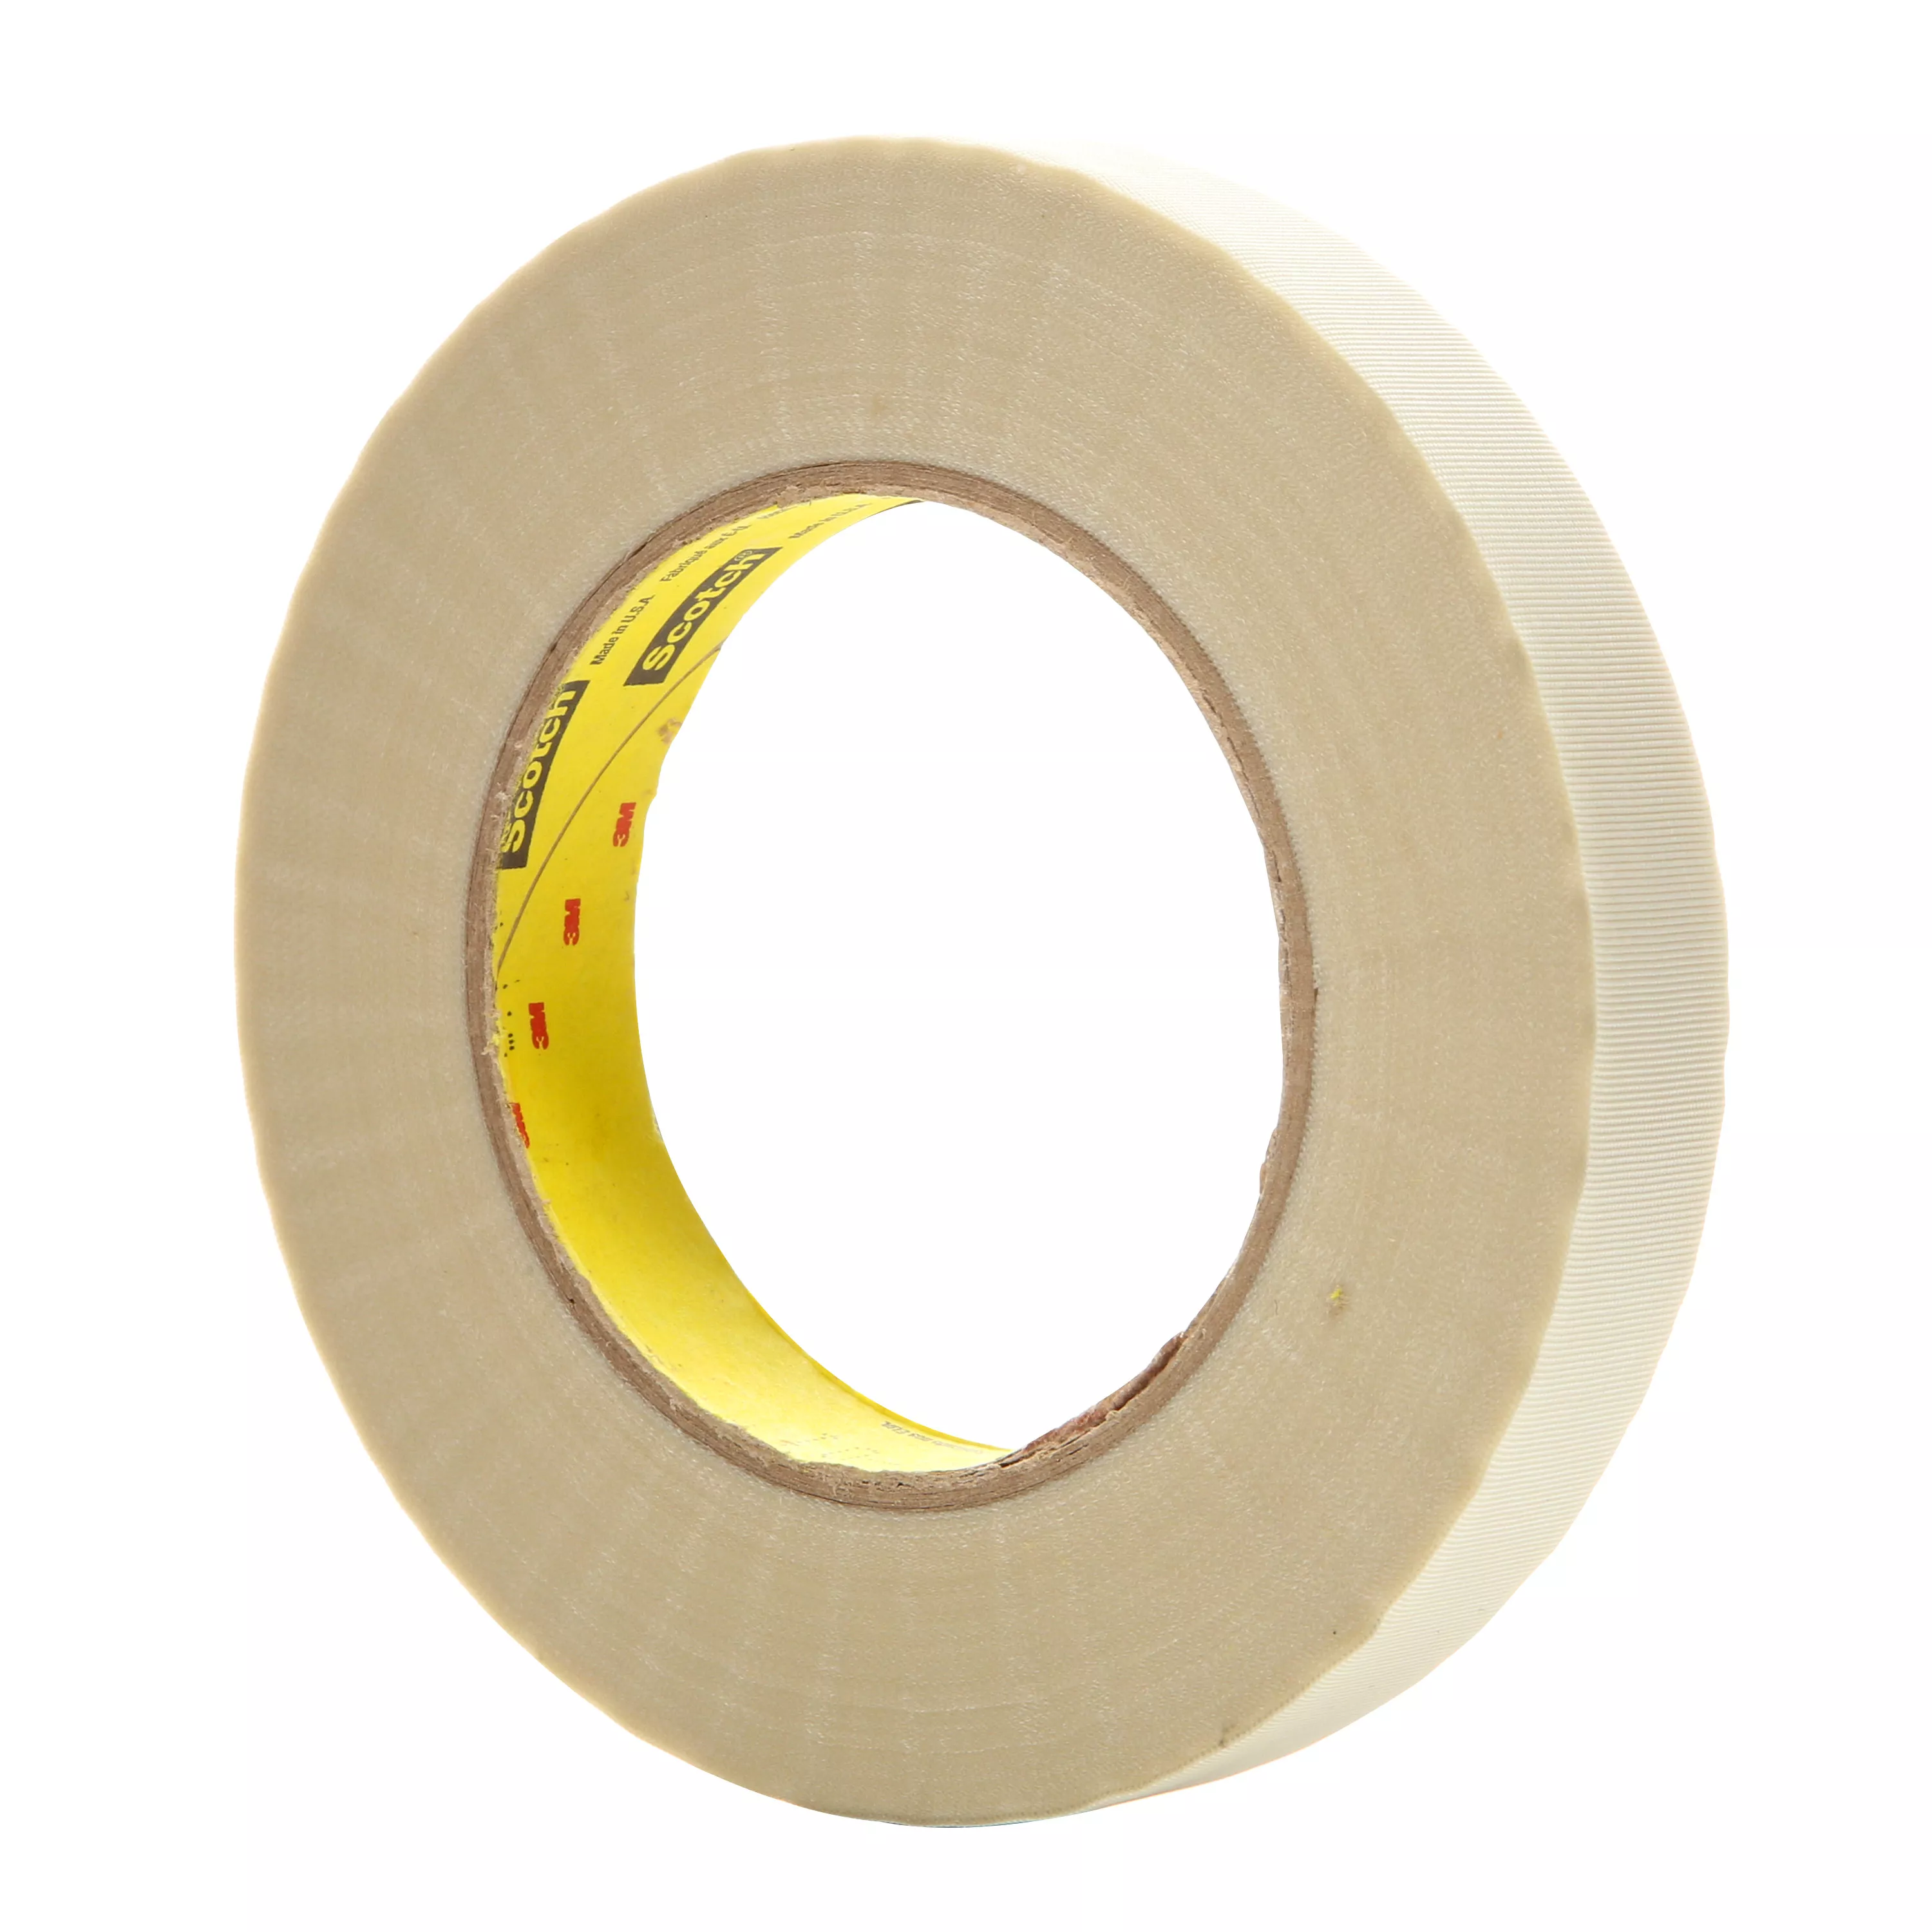 Product Number 361 | 3M™ Glass Cloth Tape 361